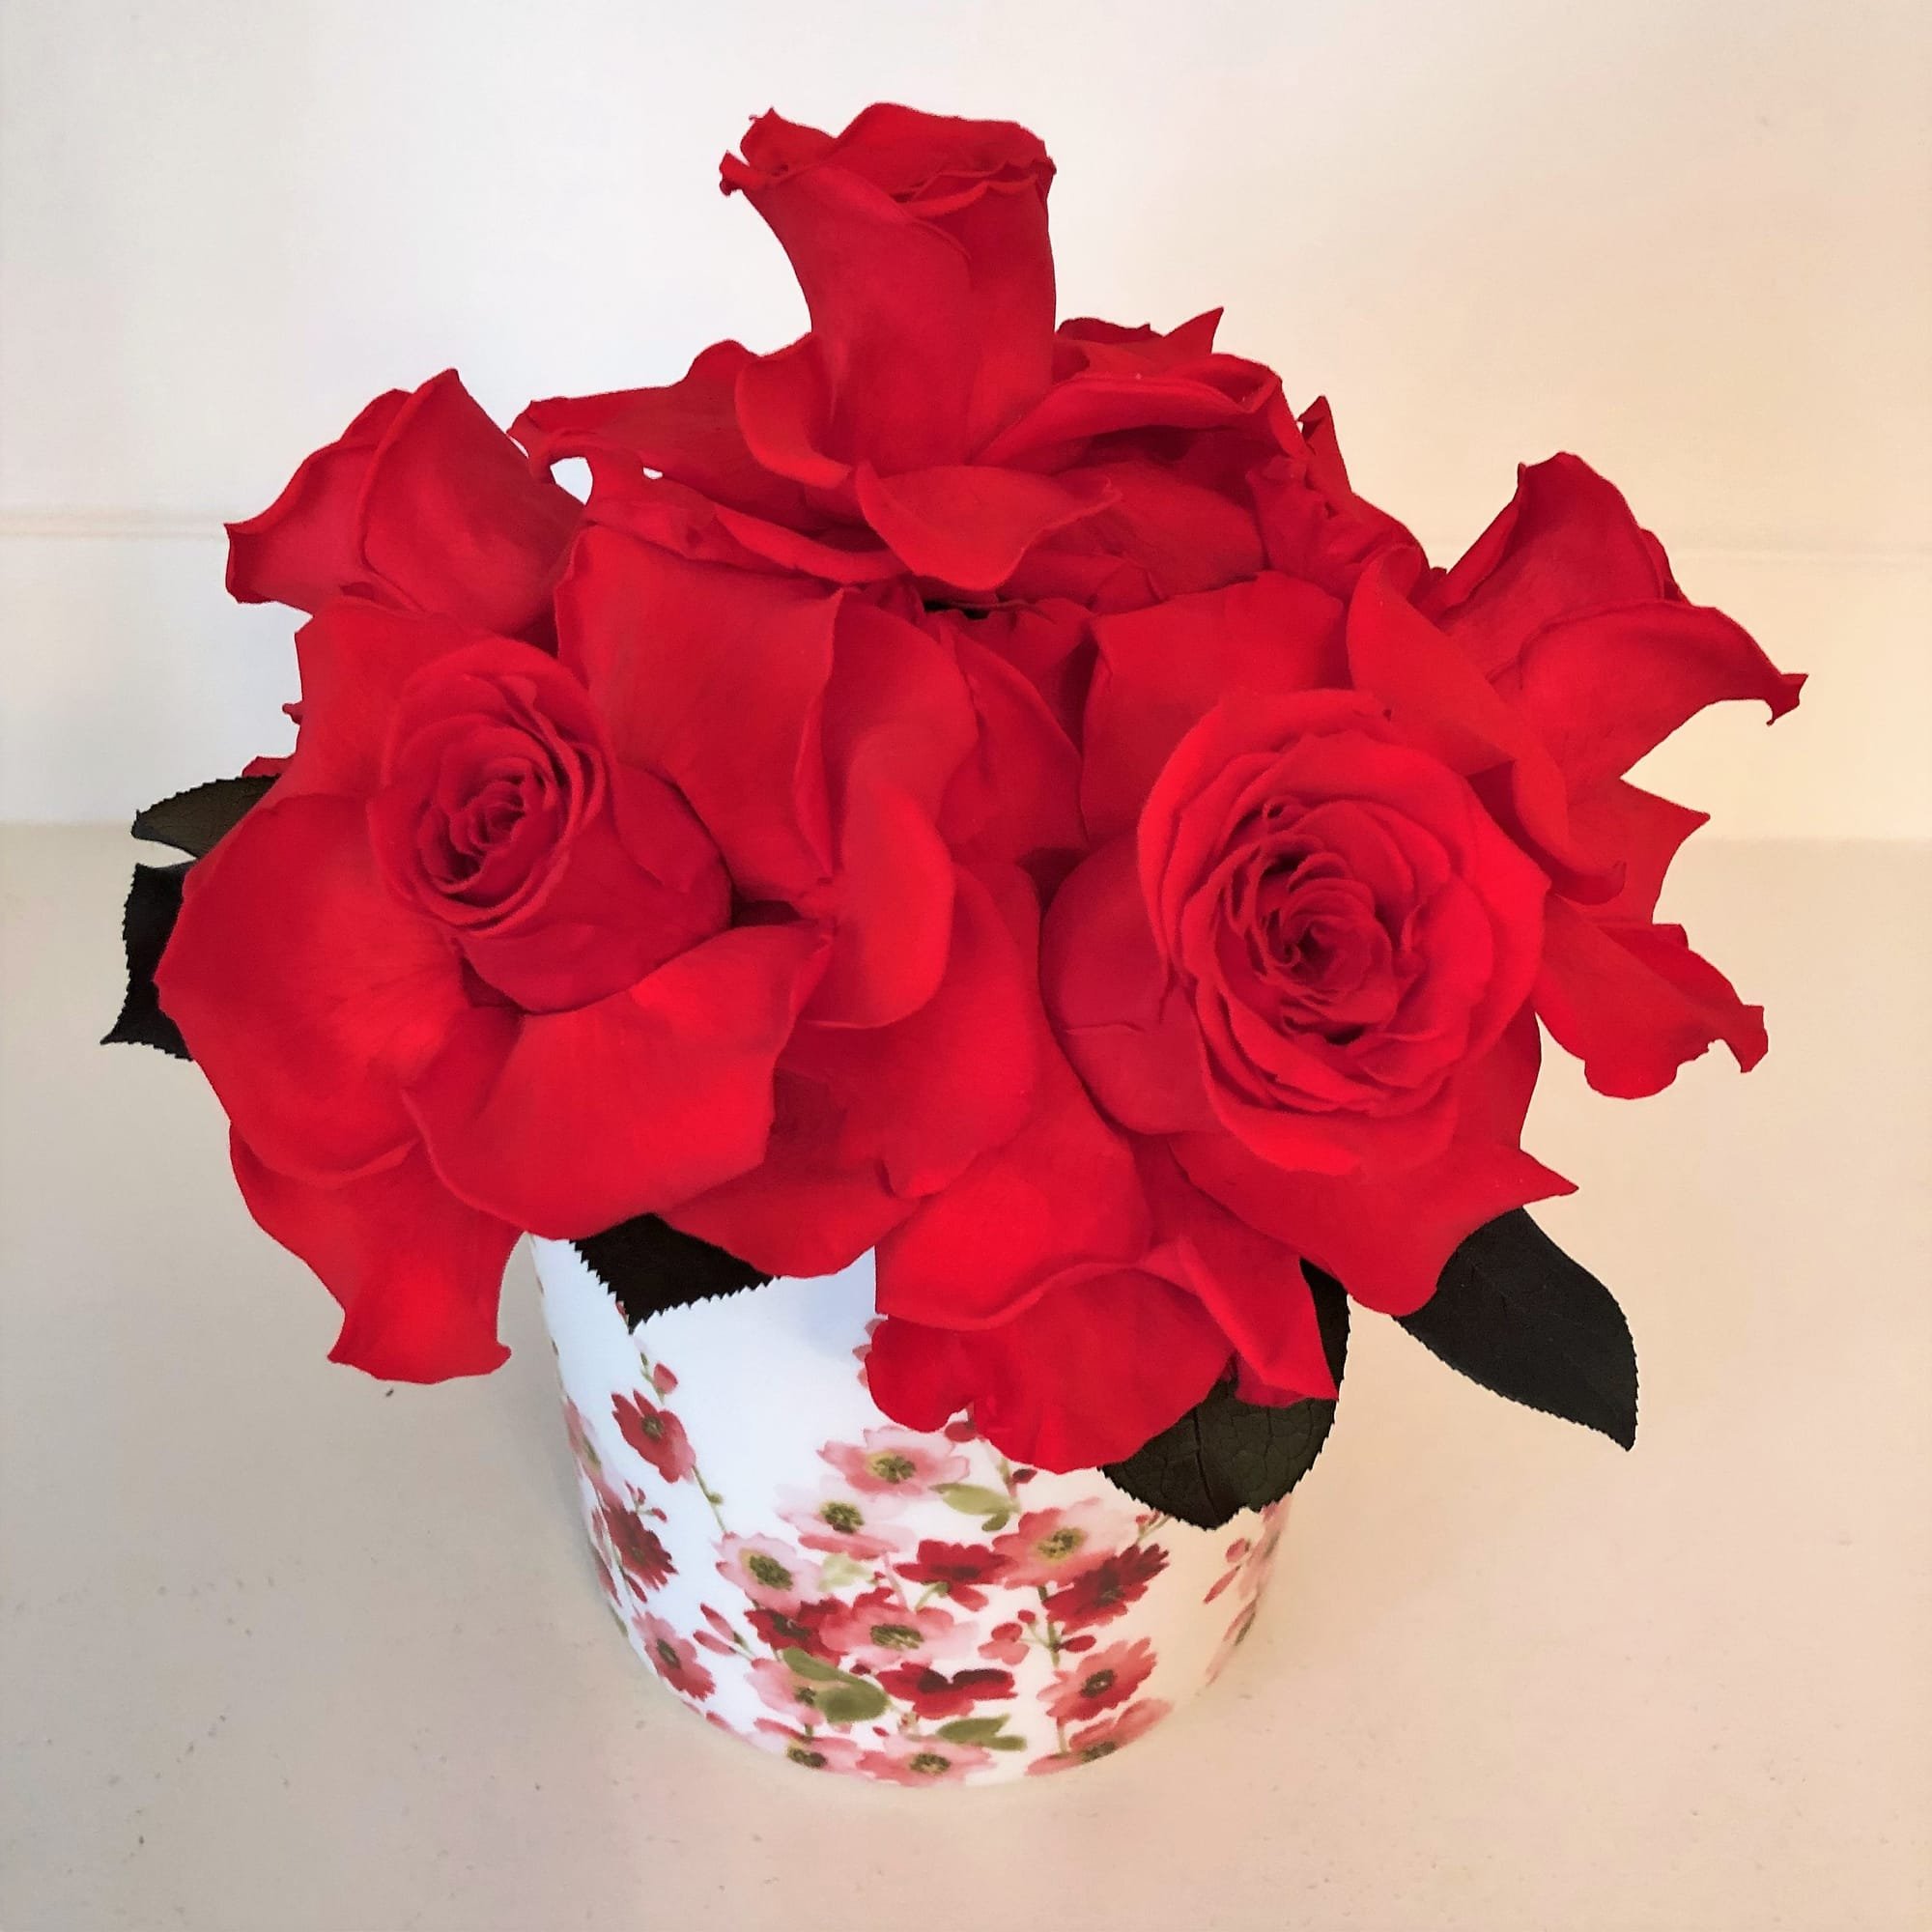 122 Red Roses in vase with Red flowers